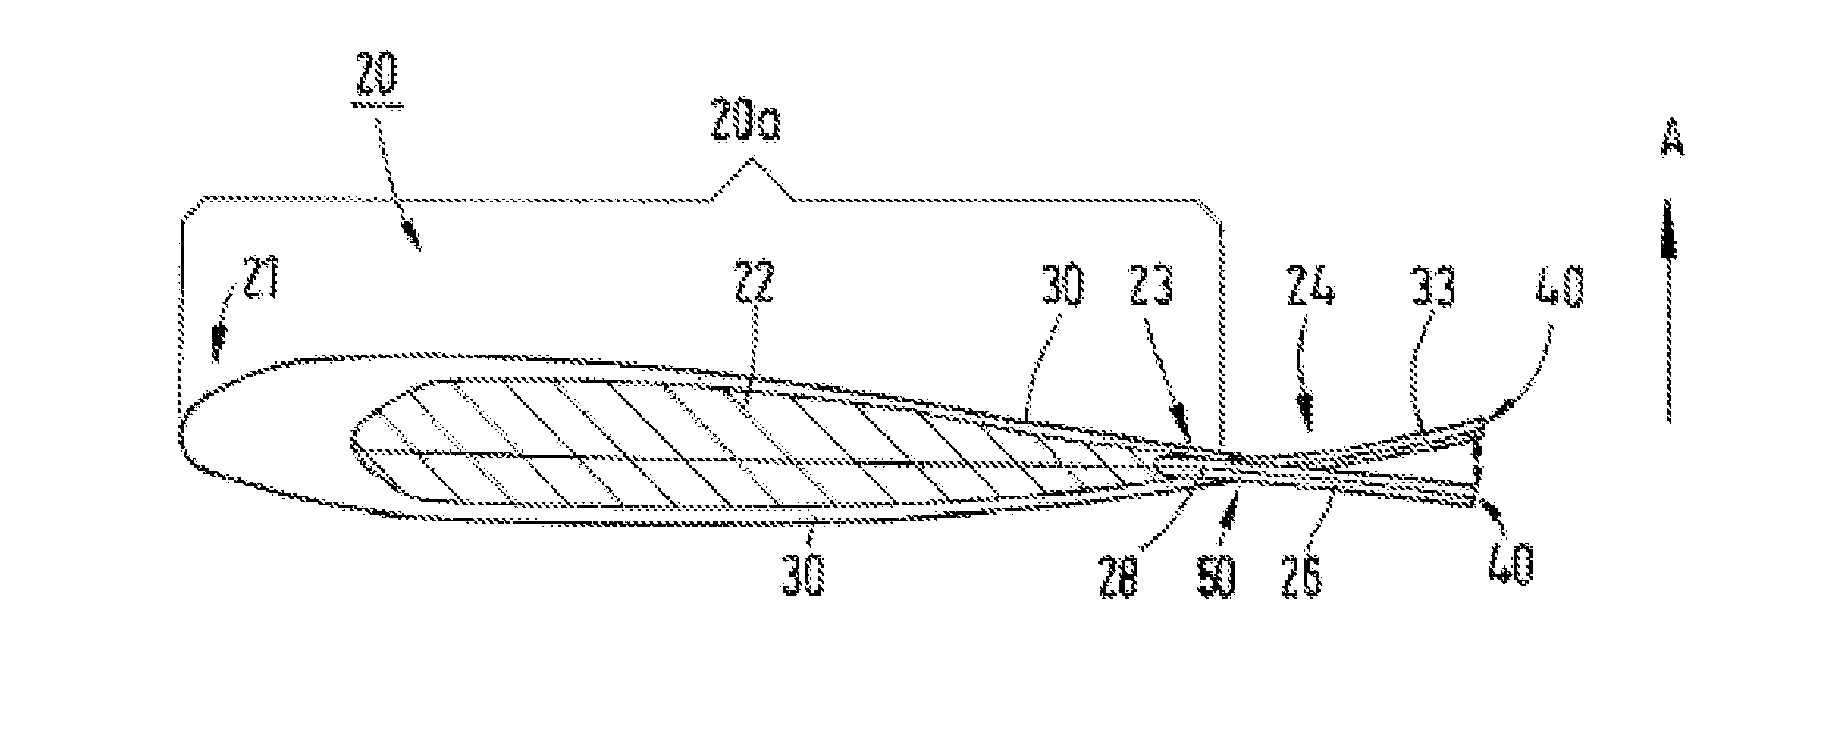 Rotor blade for a rotary wing aircraft